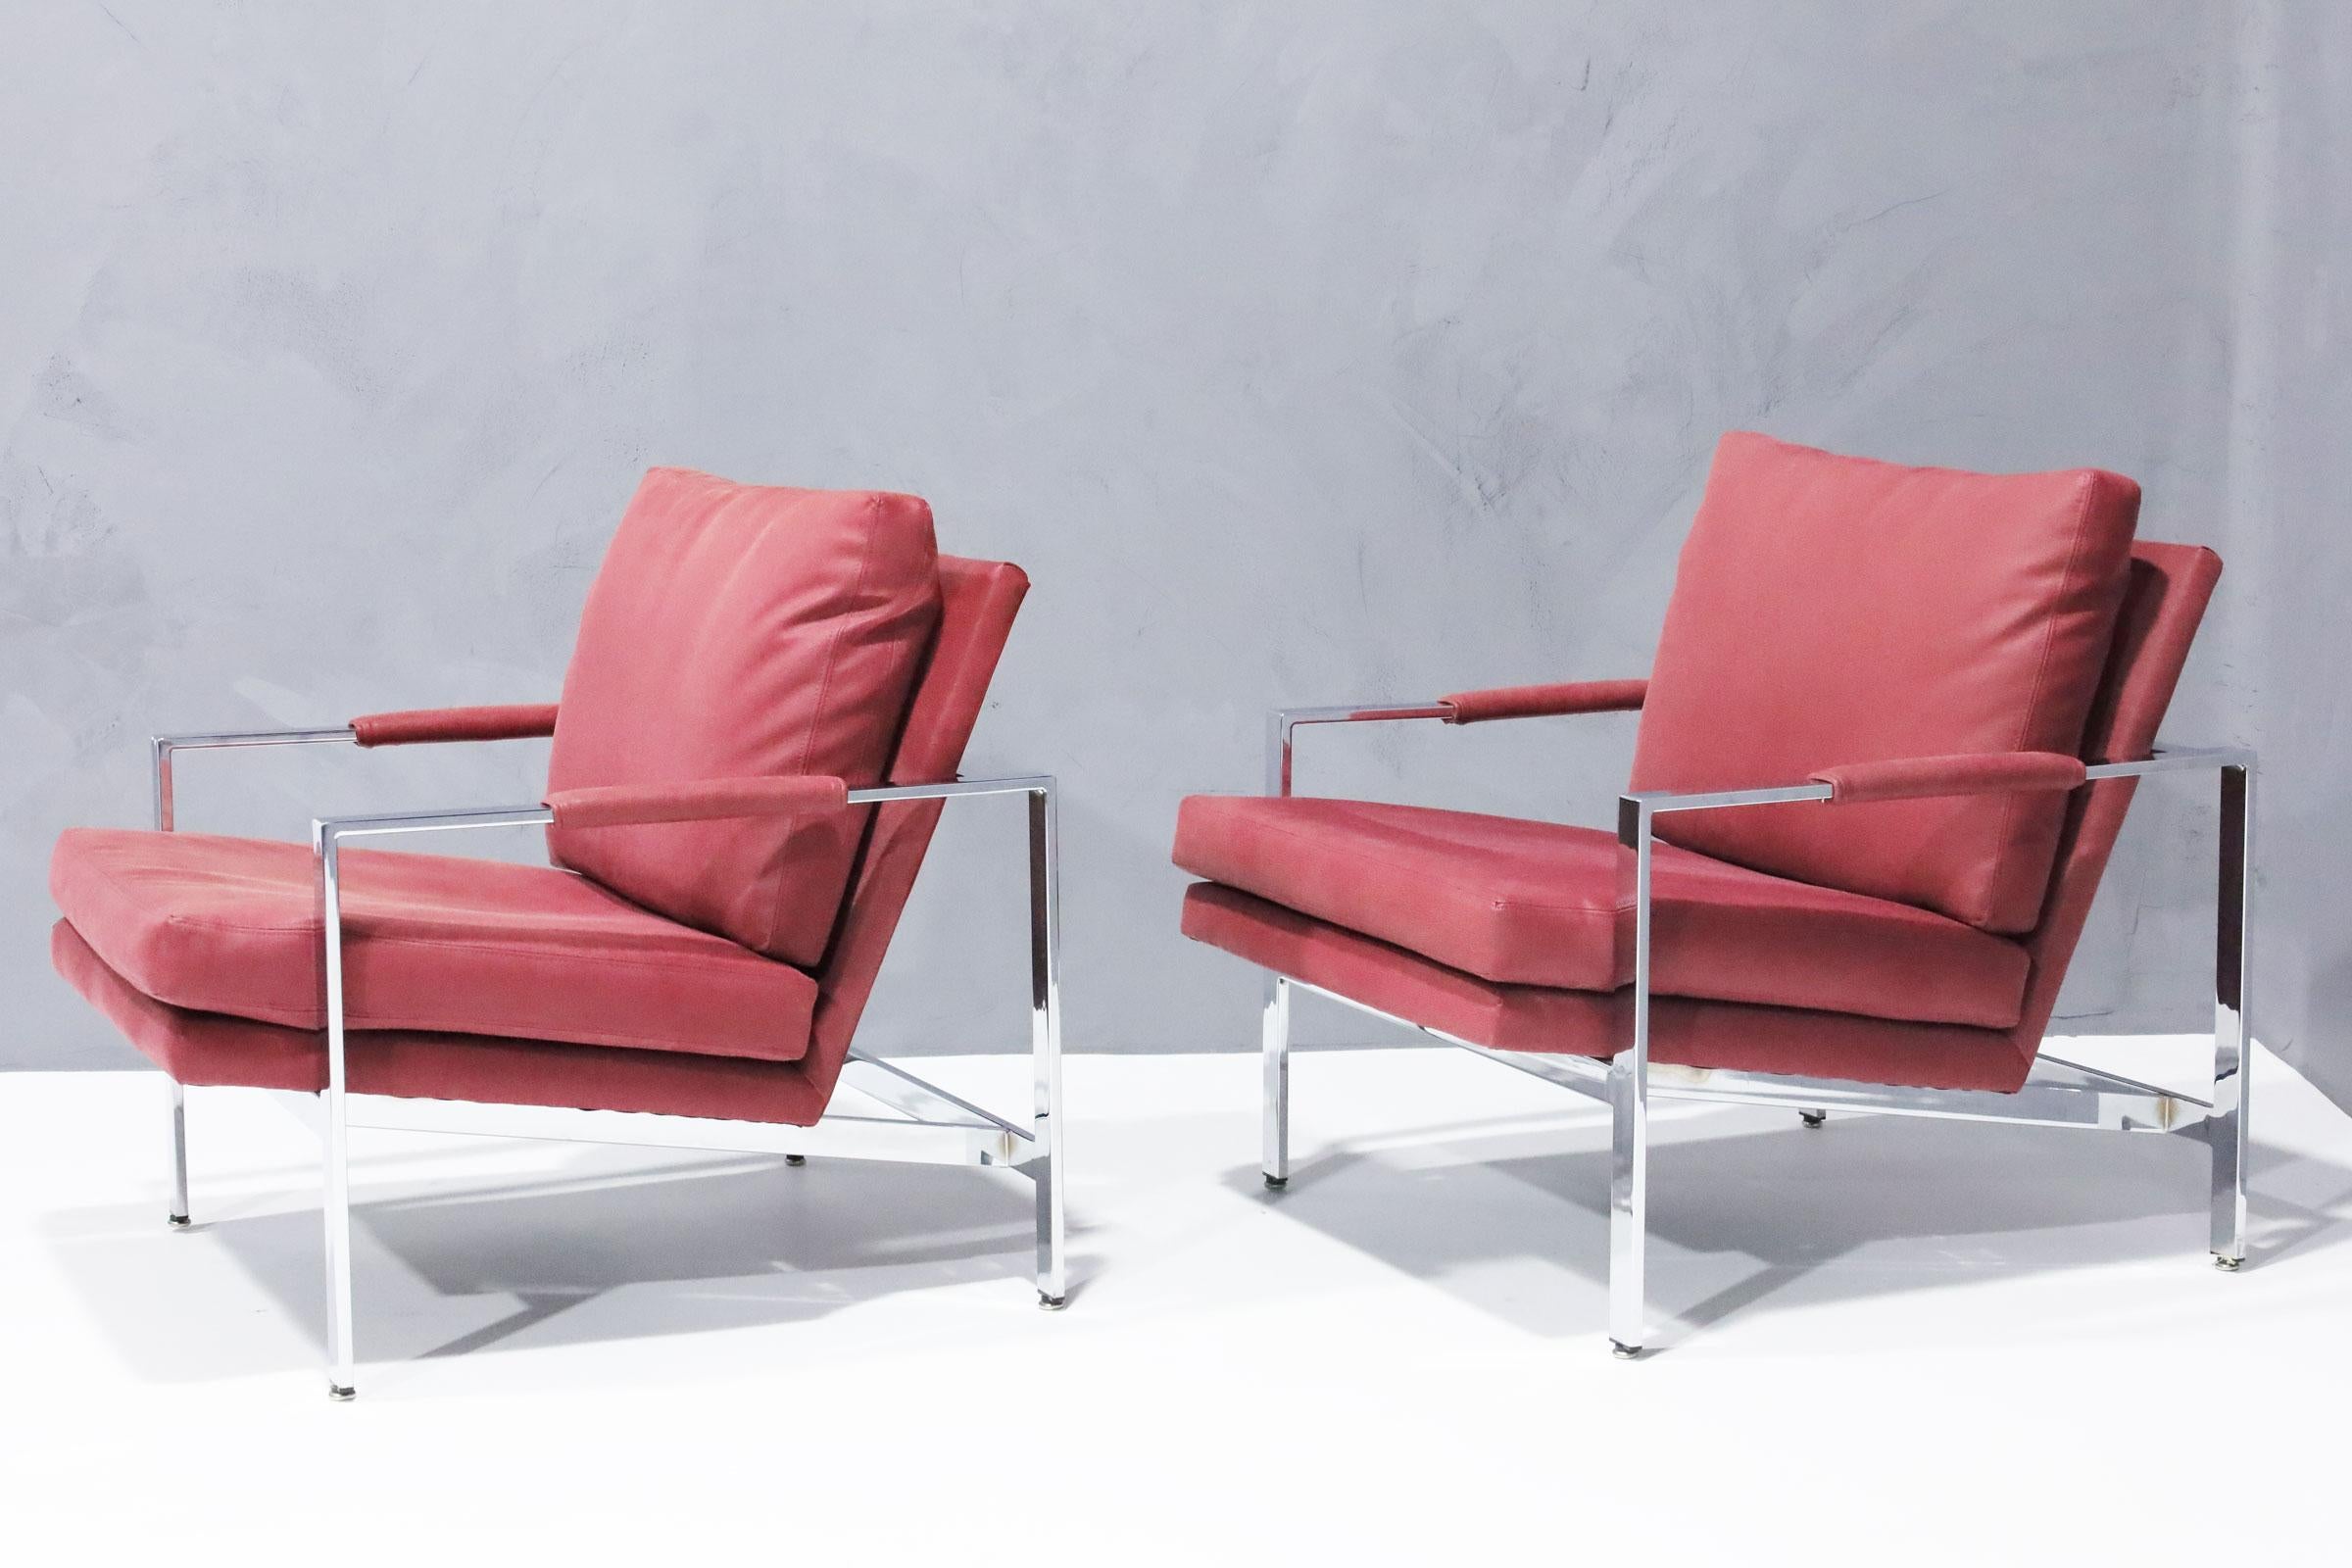 Milo Baughman Chrome Frame Lounge Chairs in Dusty Rose Faux Suede/Leather In Good Condition For Sale In Dallas, TX